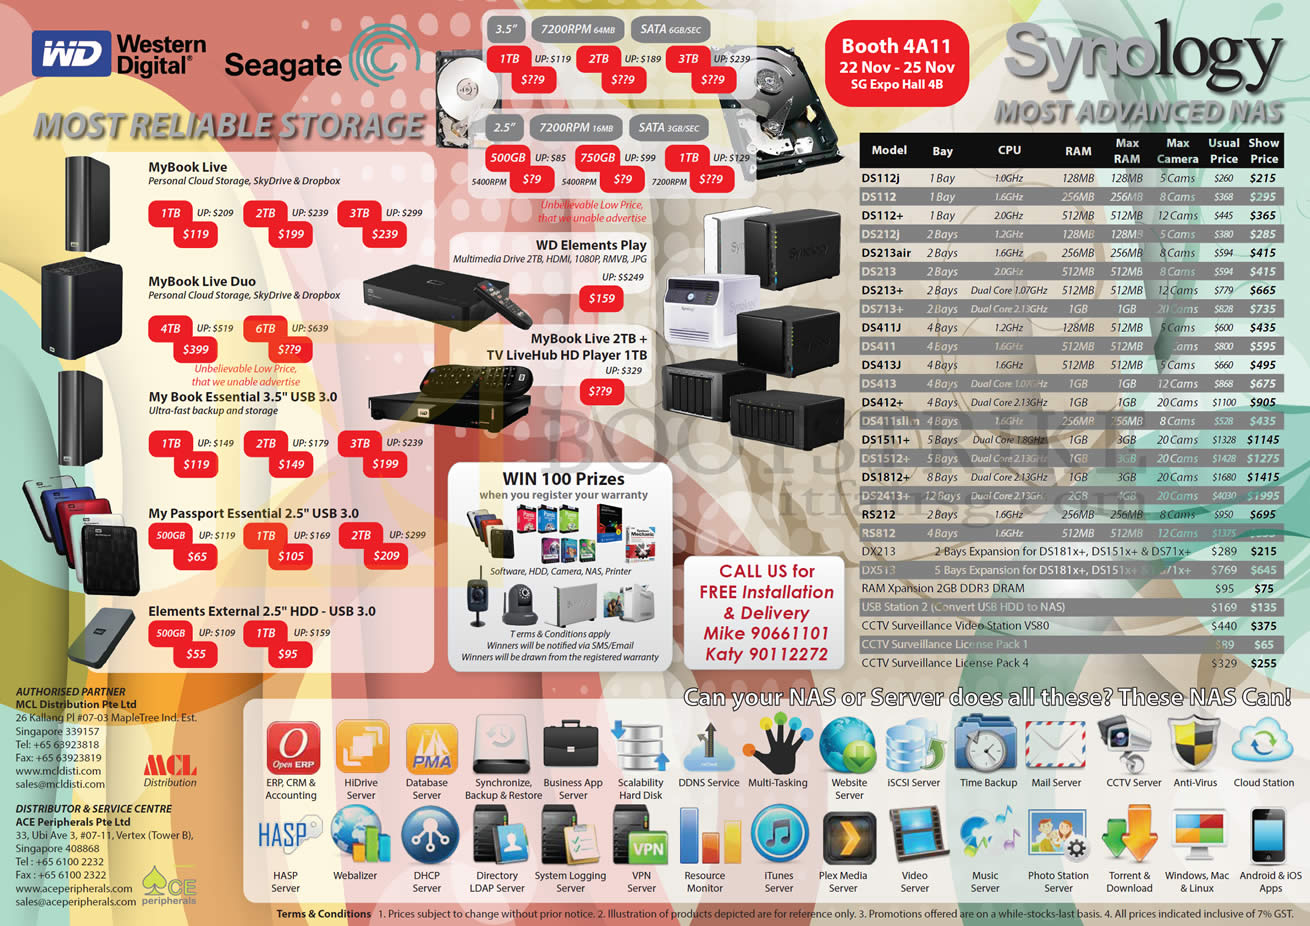 SITEX 2012 price list image brochure of MCL Distribution External Storage Western Digital WD MyBook Live Duo, Essential, Passport, Elements, TV LiveHub, Seagate, Synology NAS